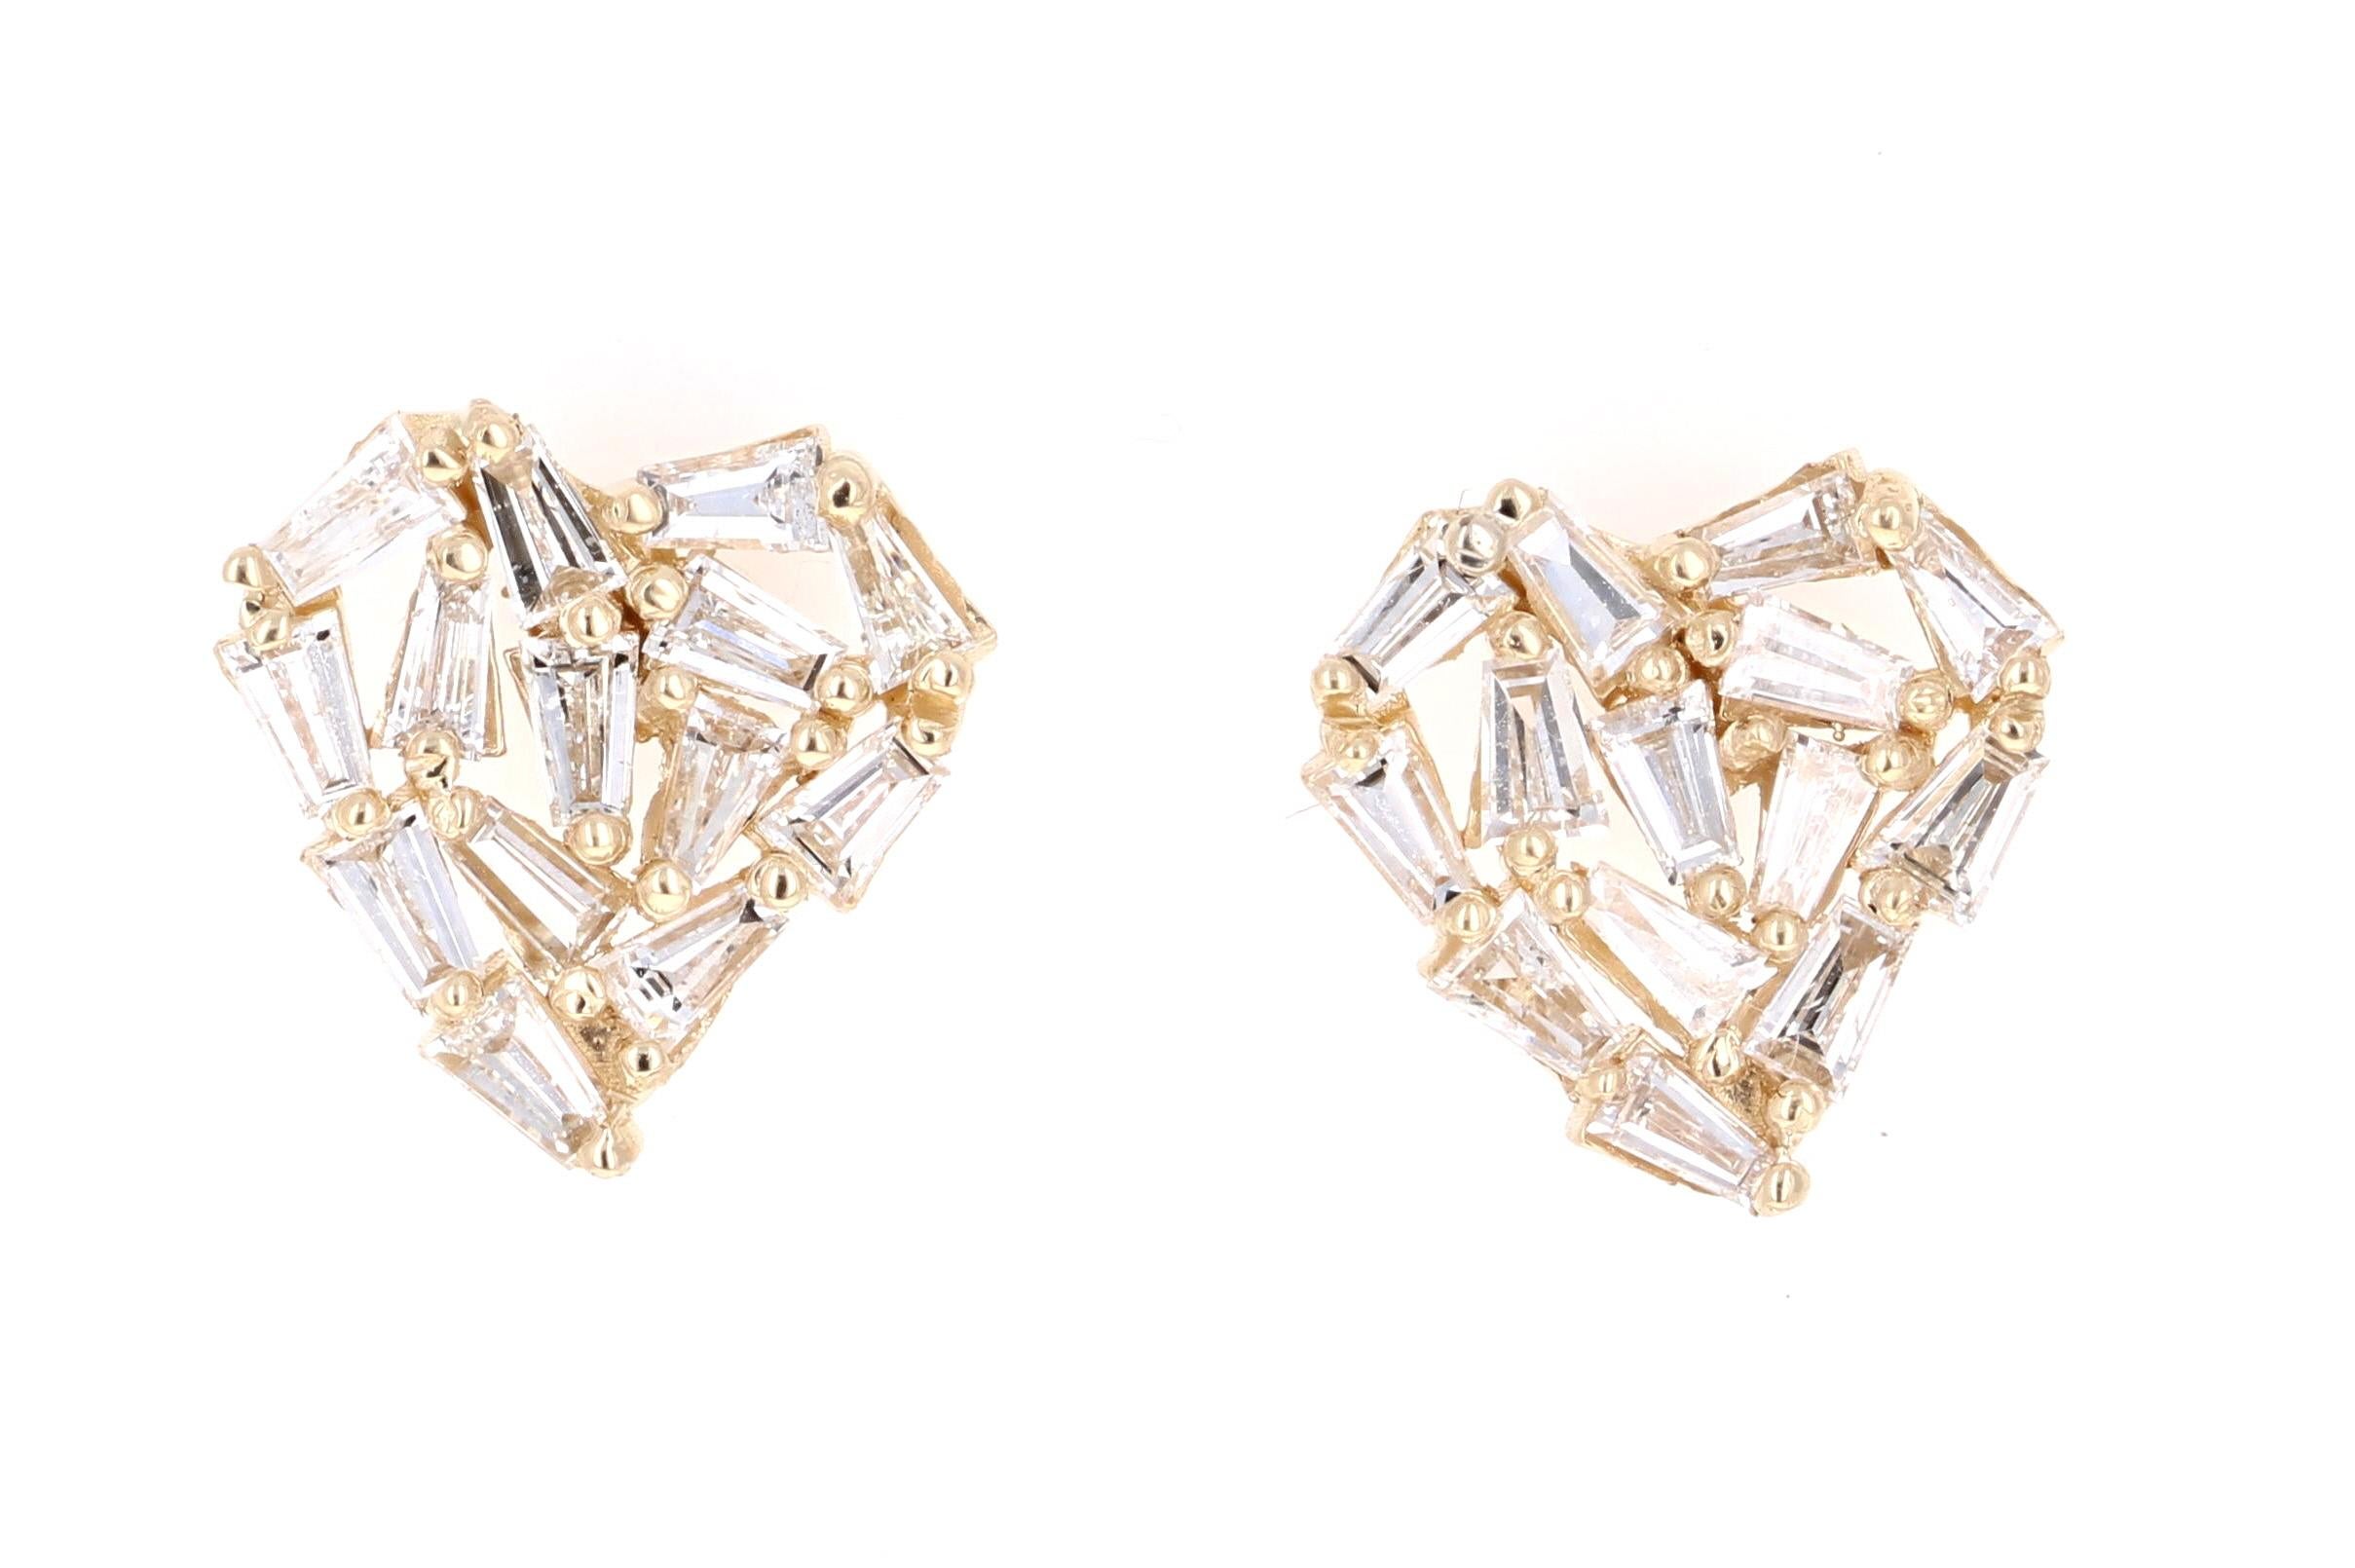 Cute, dainty earrings that make a statement!
1.21 Carat Baguette Cut Diamond 14 Karat Yellow Gold Stud Earrings!

The 28 Baguette Cut Diamonds that weigh  1.21 Carats (Clarity: VS, Color: I)  are carefully set to create a Heart Design giving these a